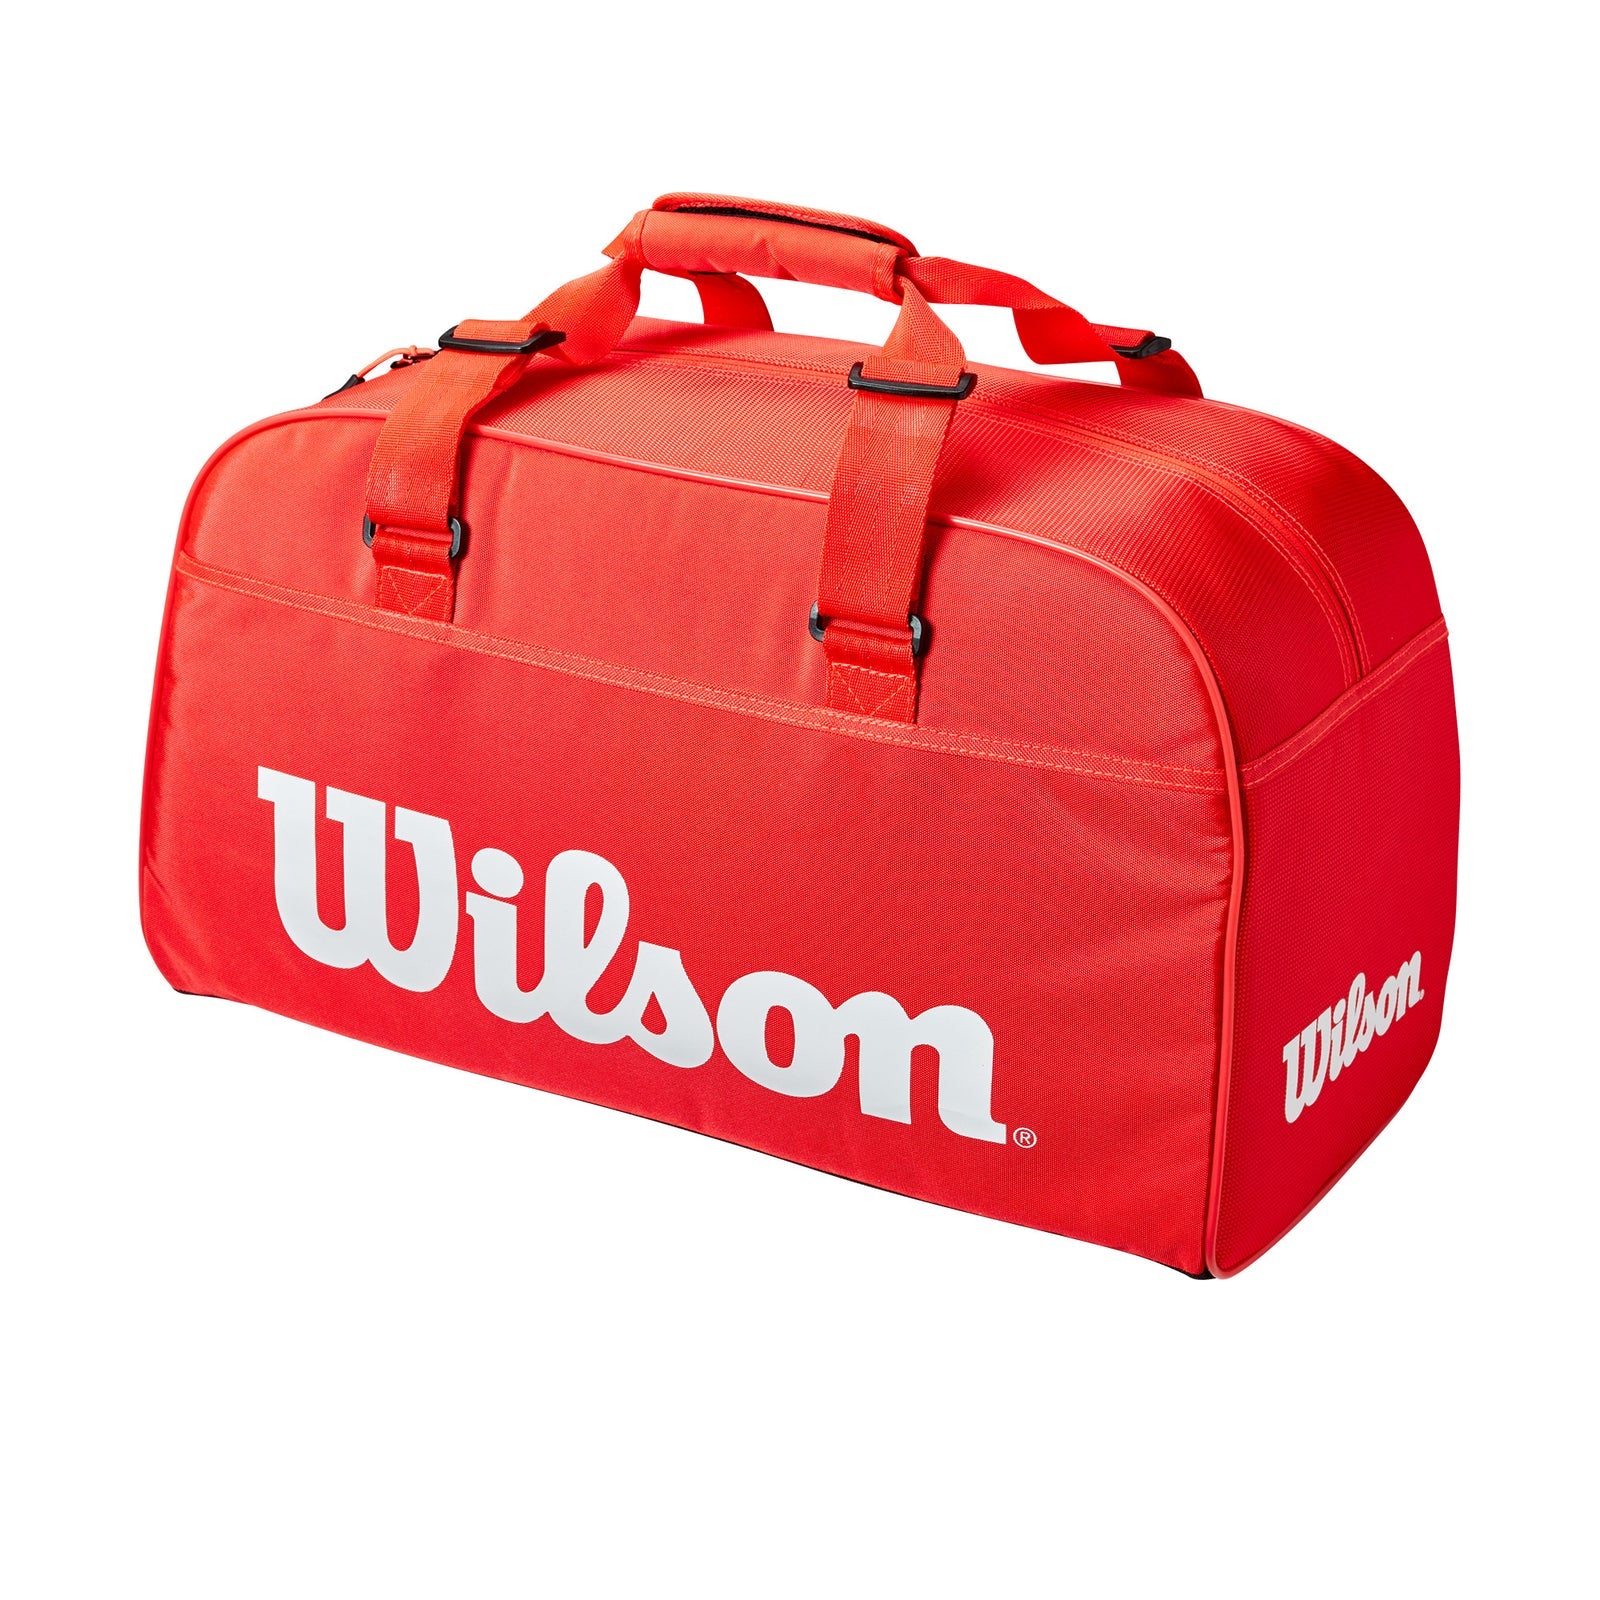 Bag - Super Tour Small Duffel - Red